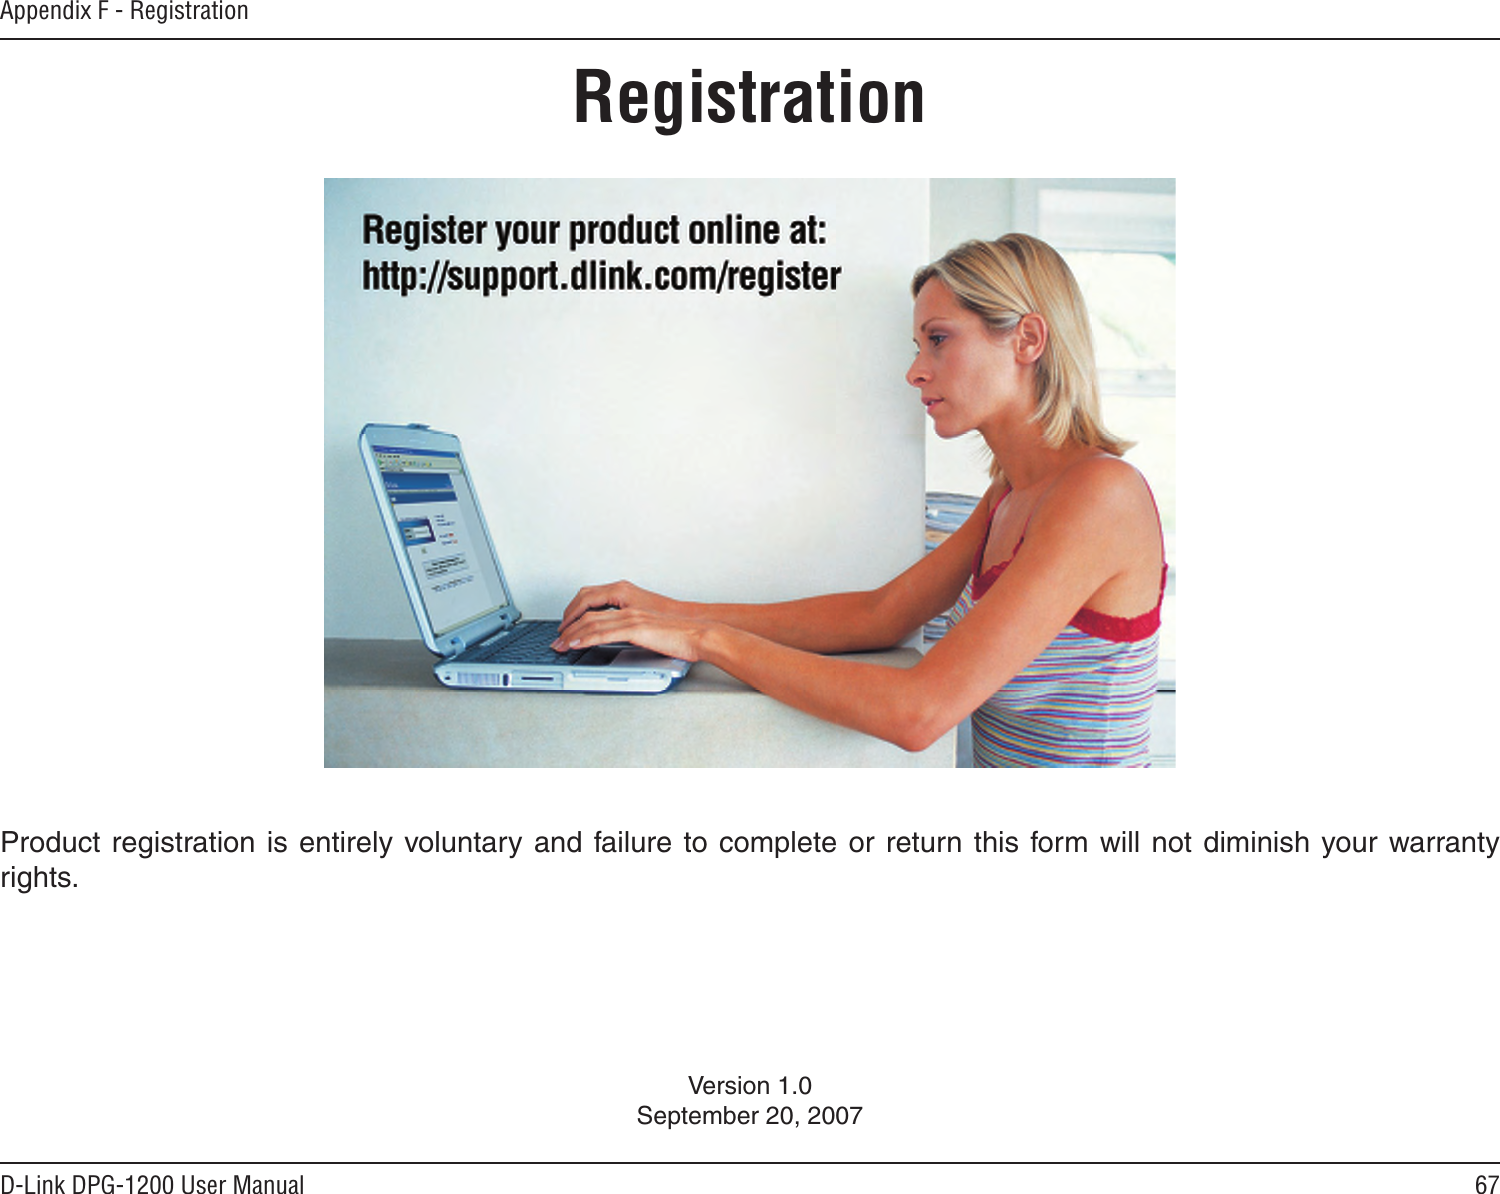 67D-Link DPG-1200 User ManualAppendix F - RegistrationVersion 1.0September 20, 2007Product registration is entirely  voluntary and  failure to complete  or return this form  will not diminish your warranty rights.Registration